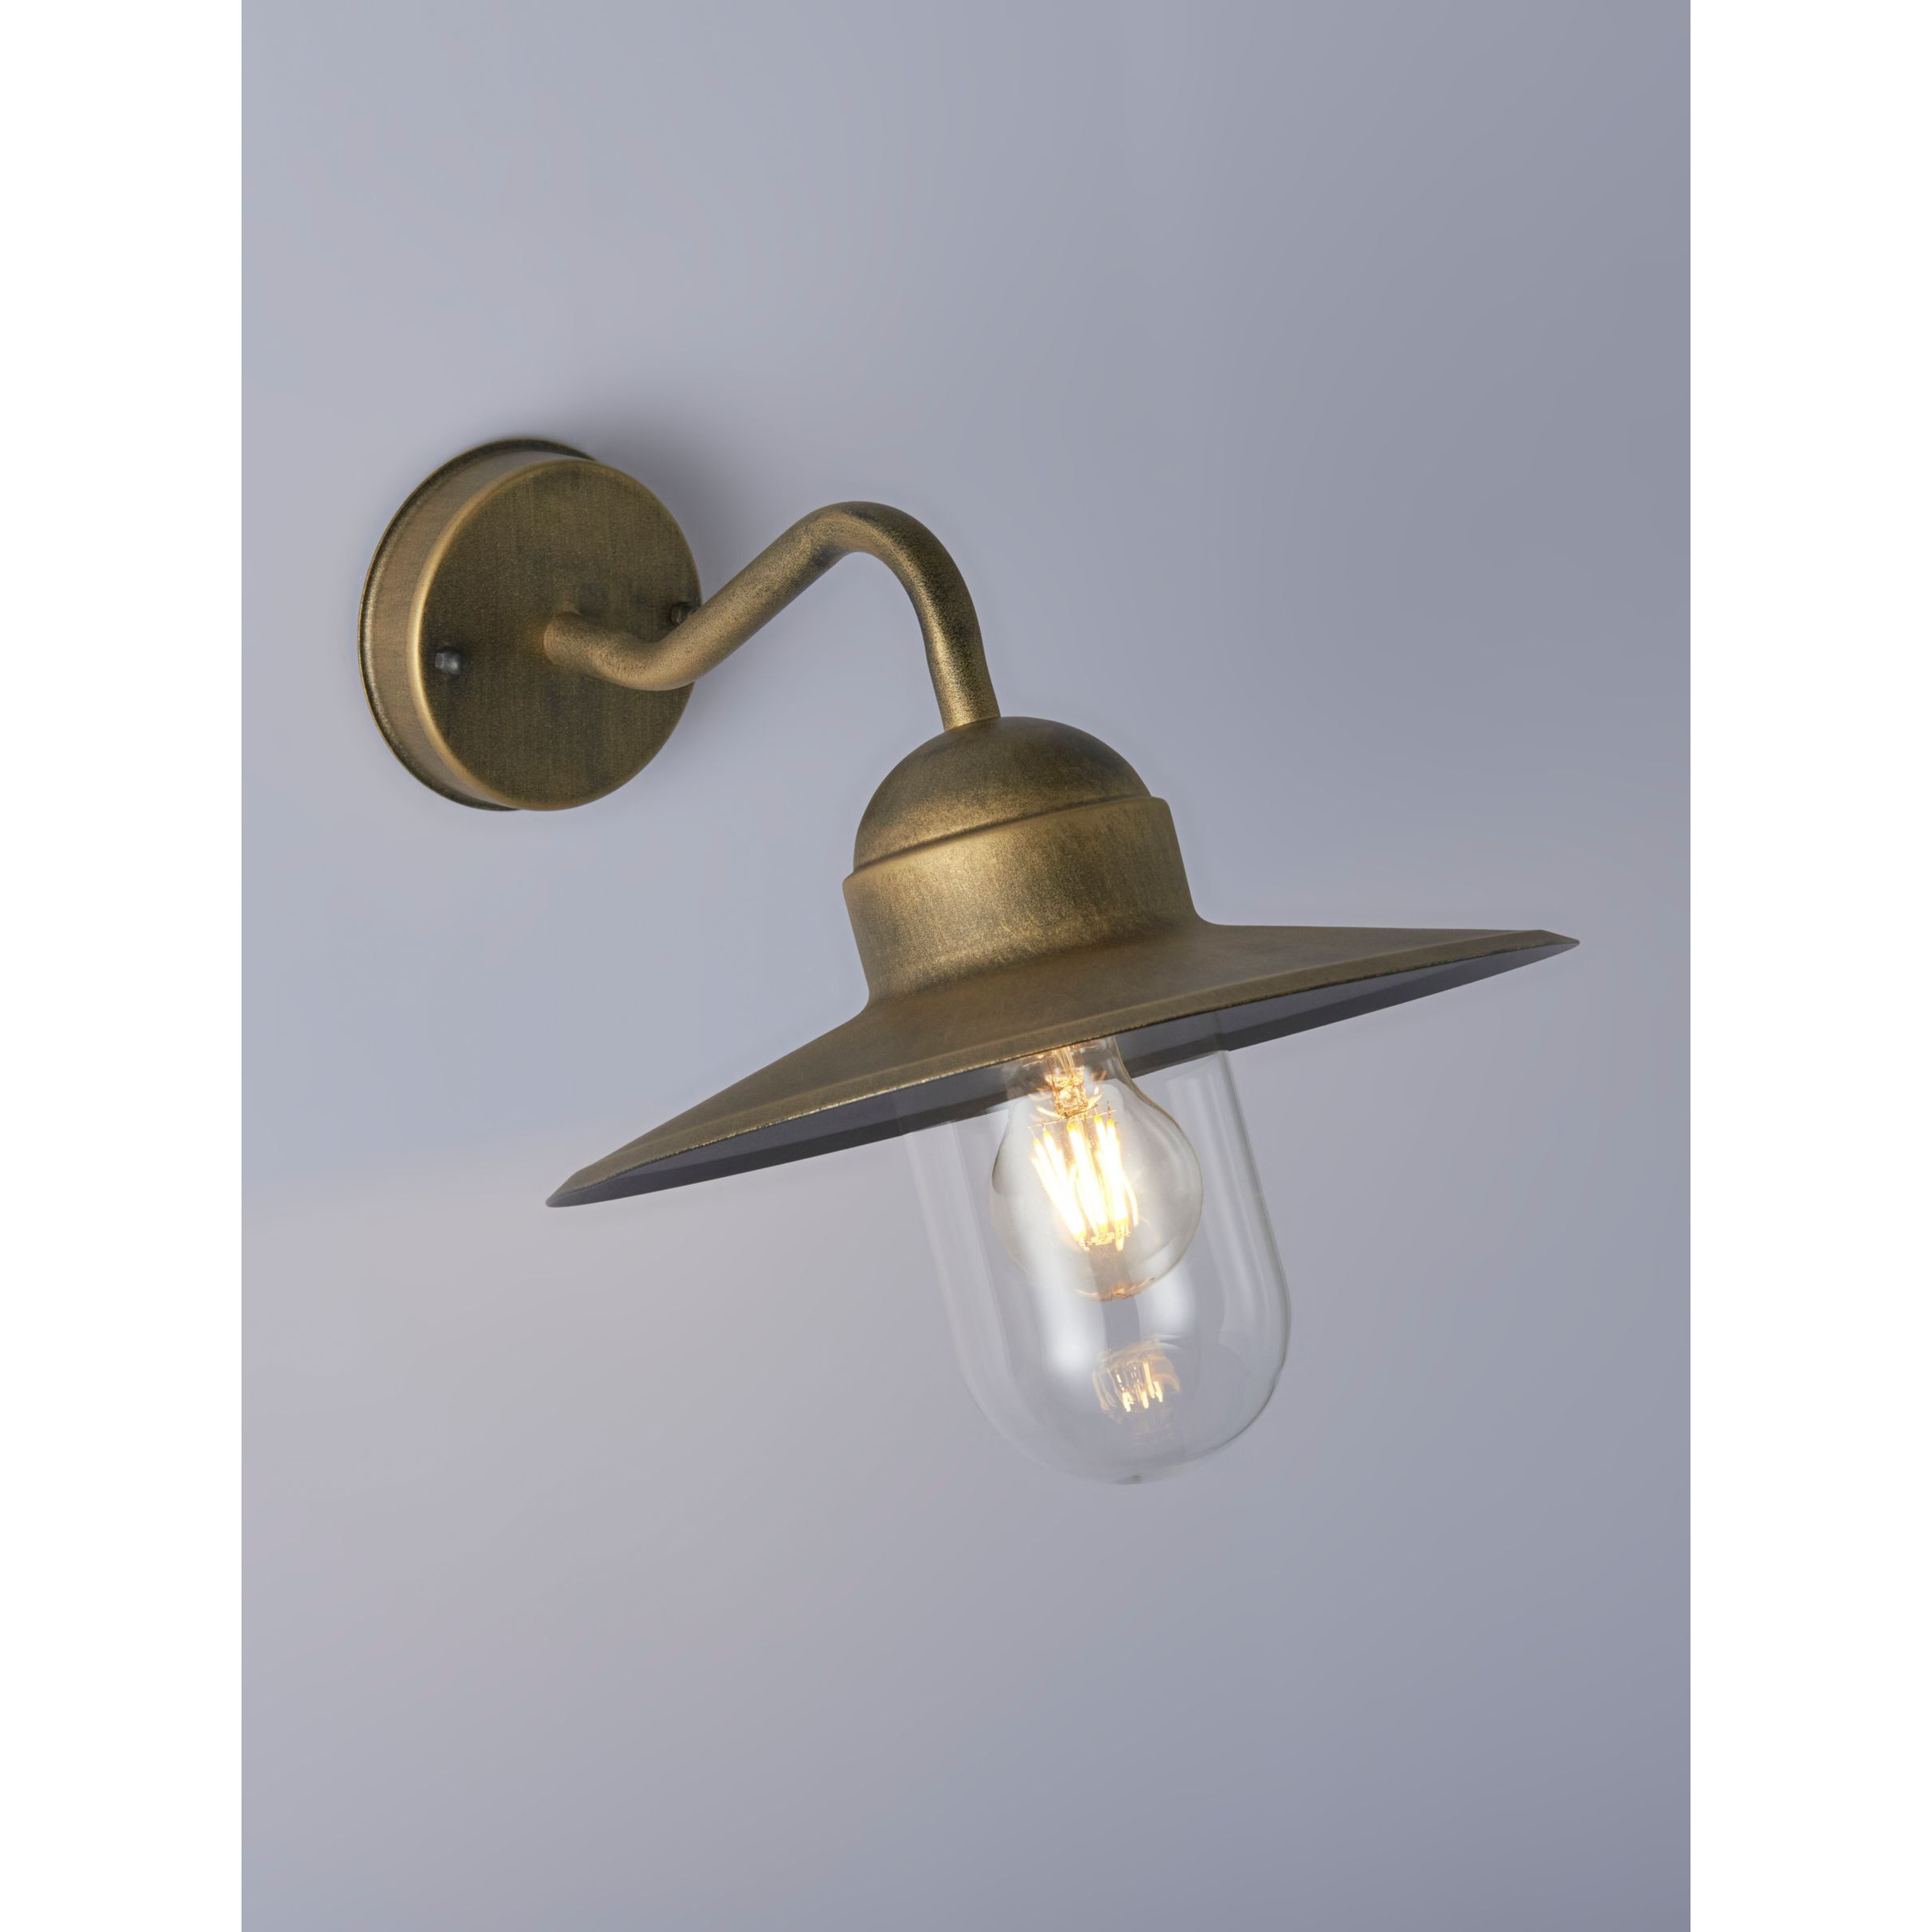 John Lewis Hayle Outdoor Wall Light, Gold - image 1